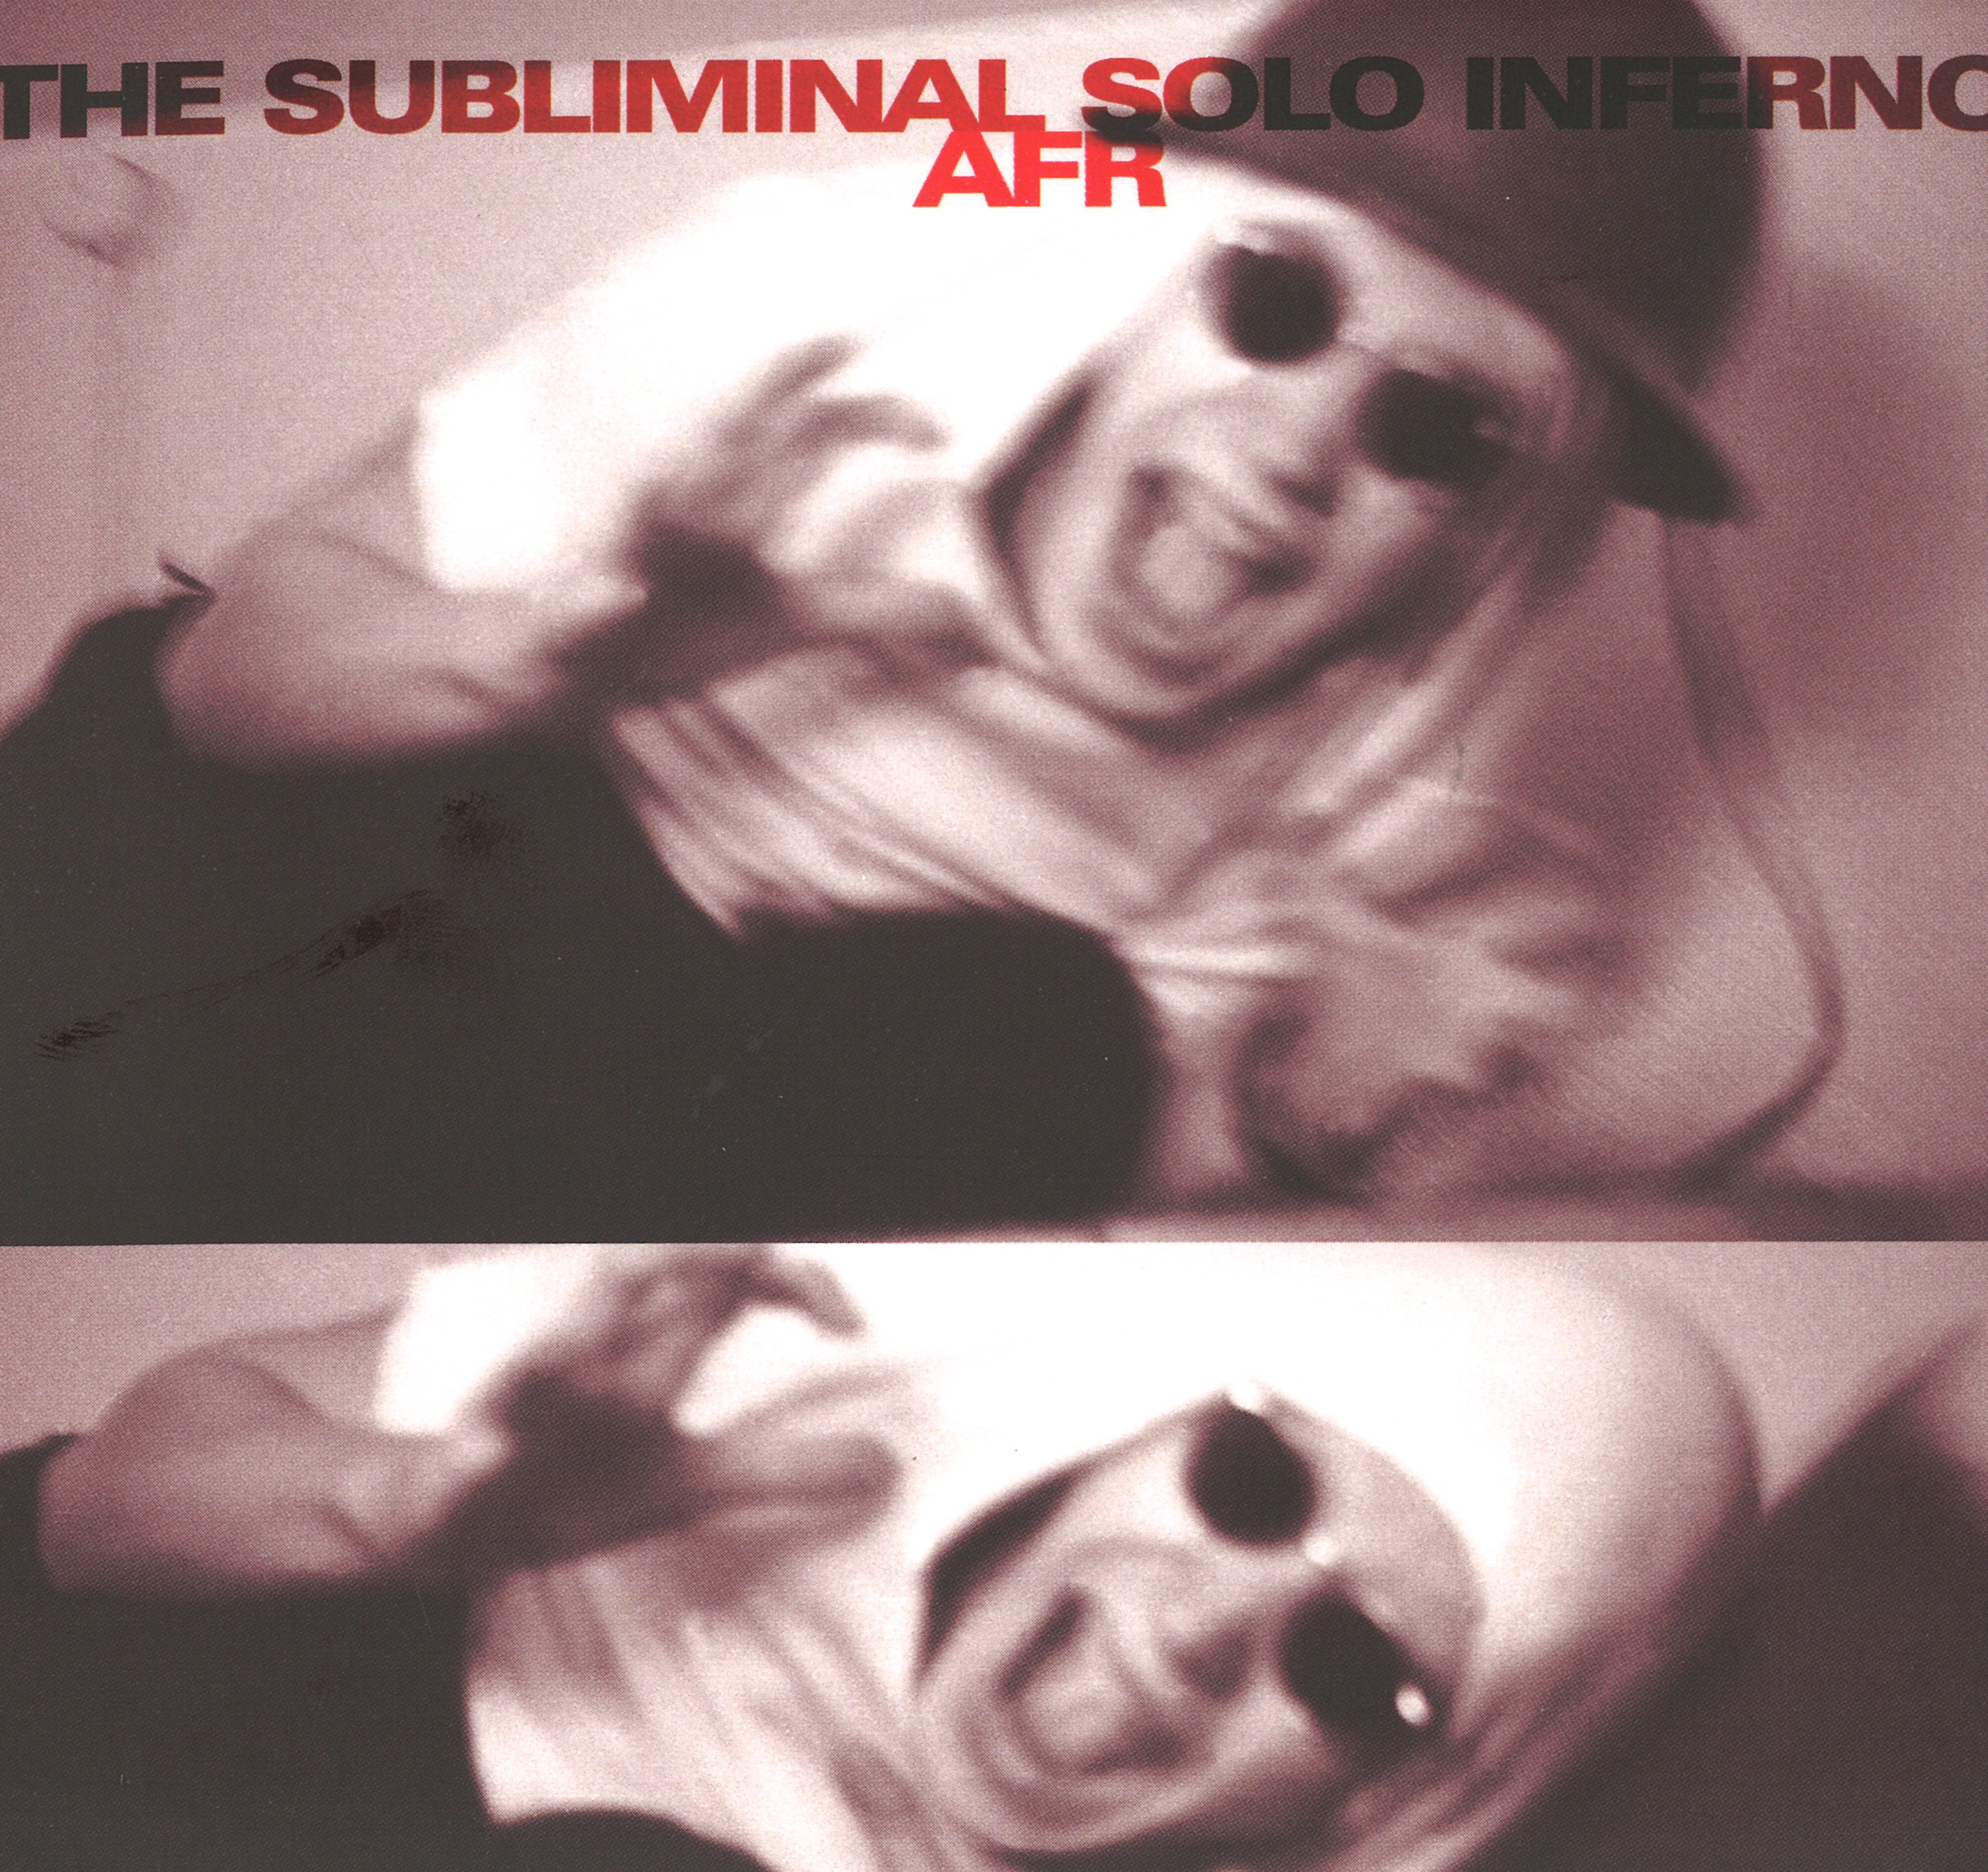 The Subliminal Solo Inferno - Anders F Rönnblom